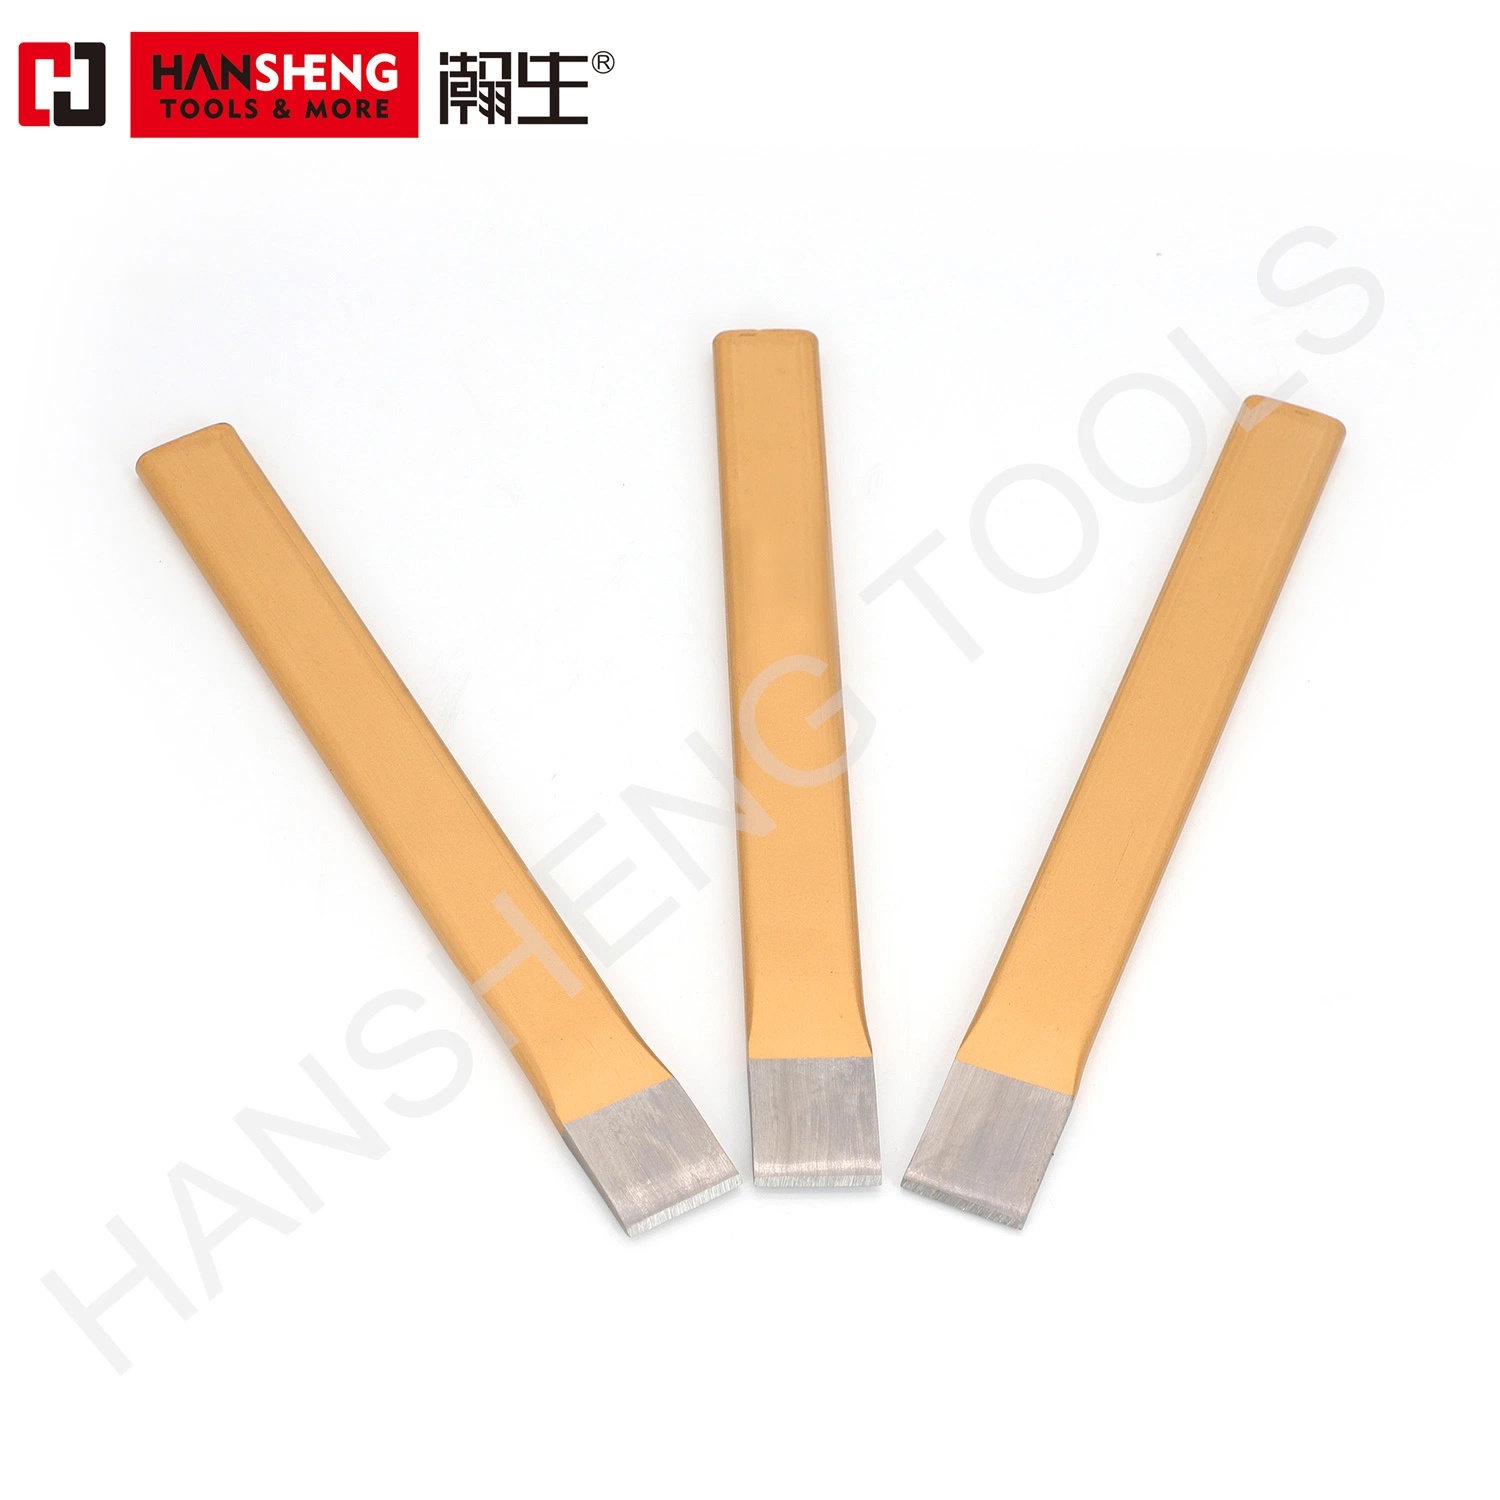 Profession Hand Tools, Chisel, Demolition Tool, Hardware Tool, Chisel Bit, High Quality, Hydraulic Breaker Chisel, for Concrete, Natural or Artificial Stone